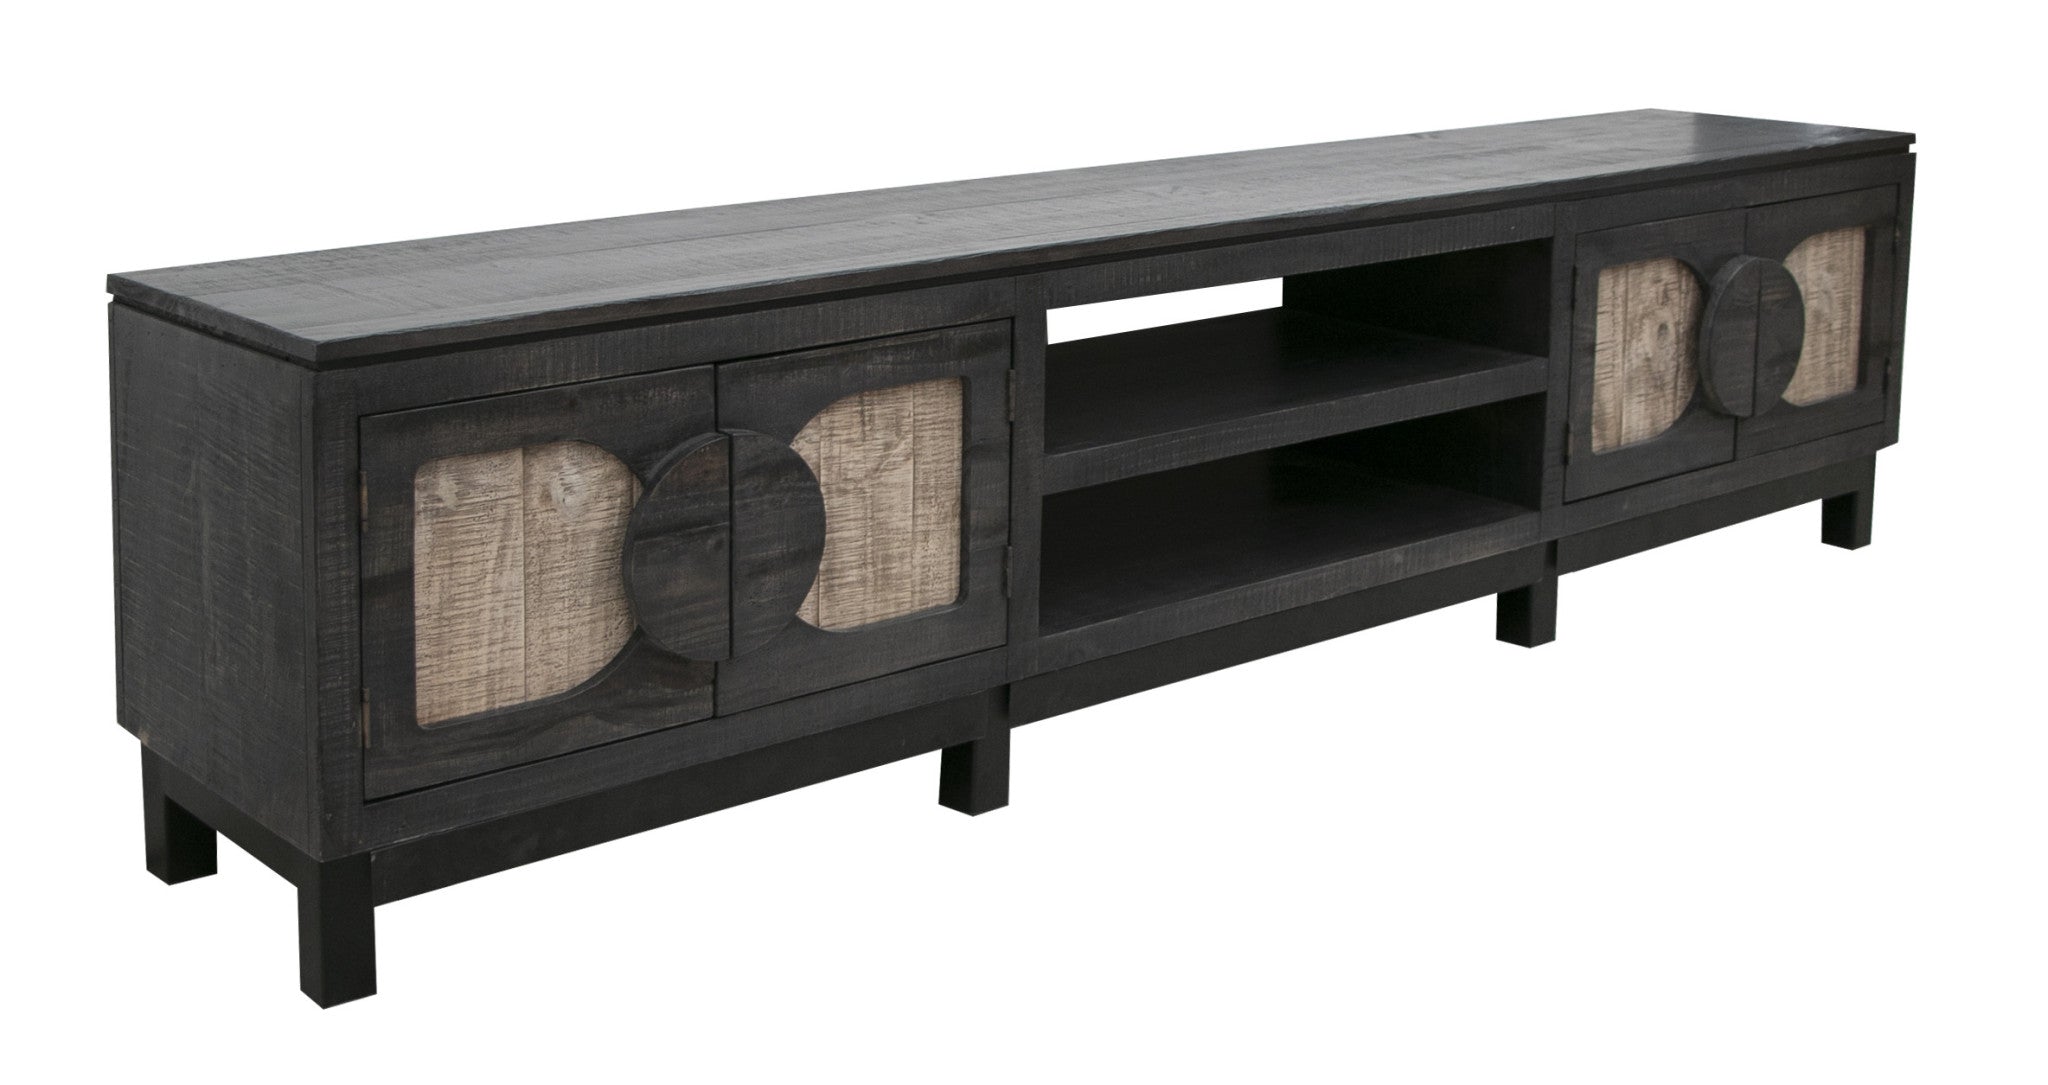 93" Black Solid Wood Cabinet Enclosed Storage Distressed TV Stand